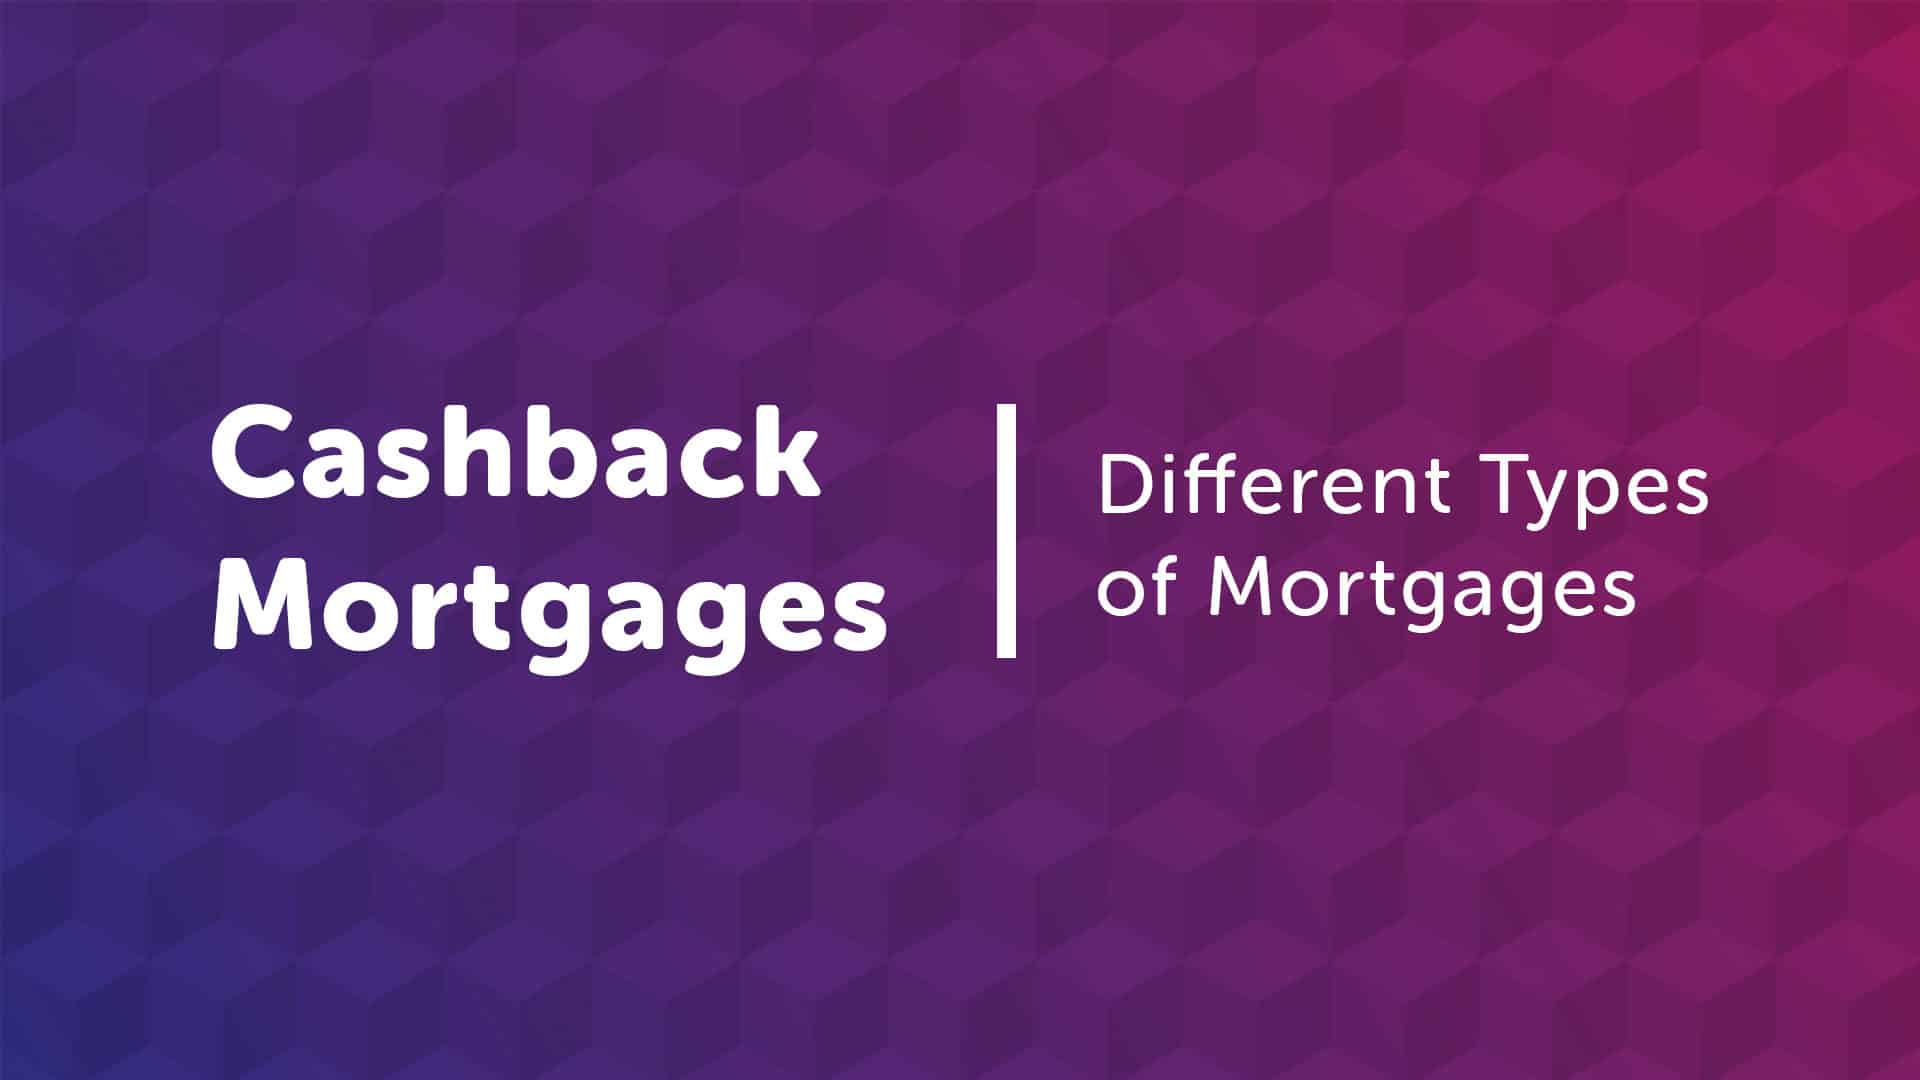 Cashback Mortgage in Manchester